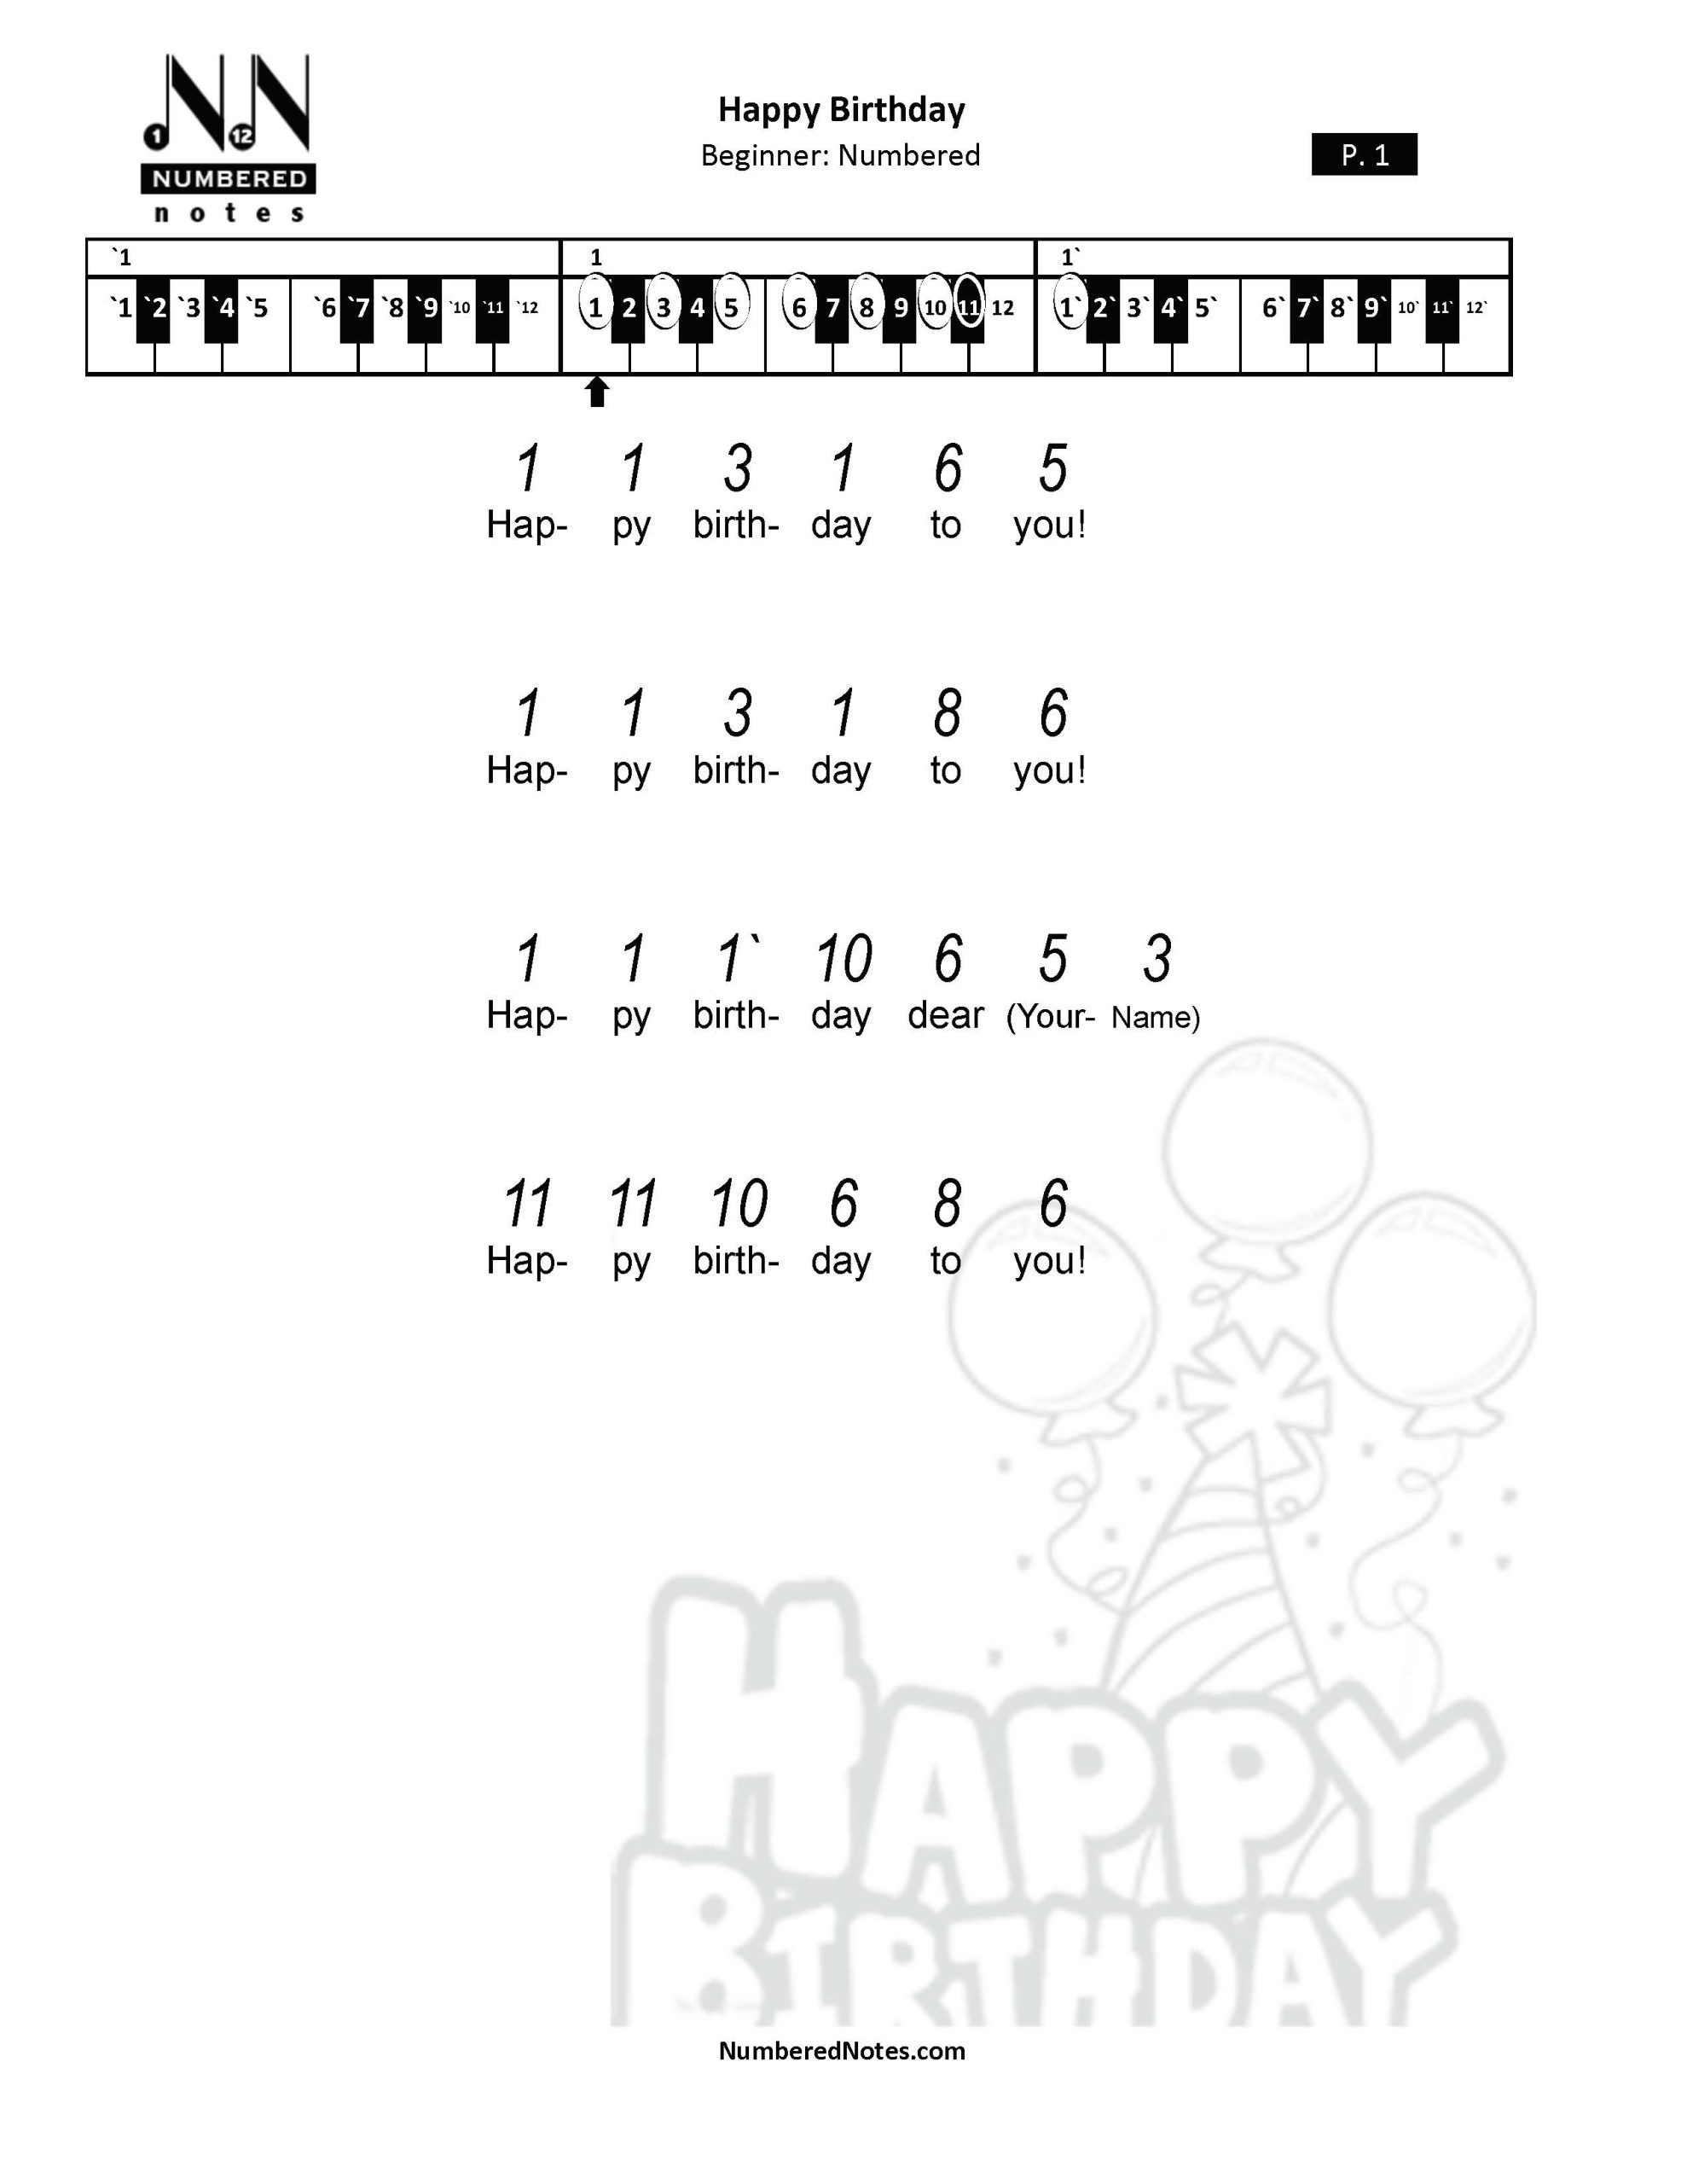 birthday song with lyrics and chords